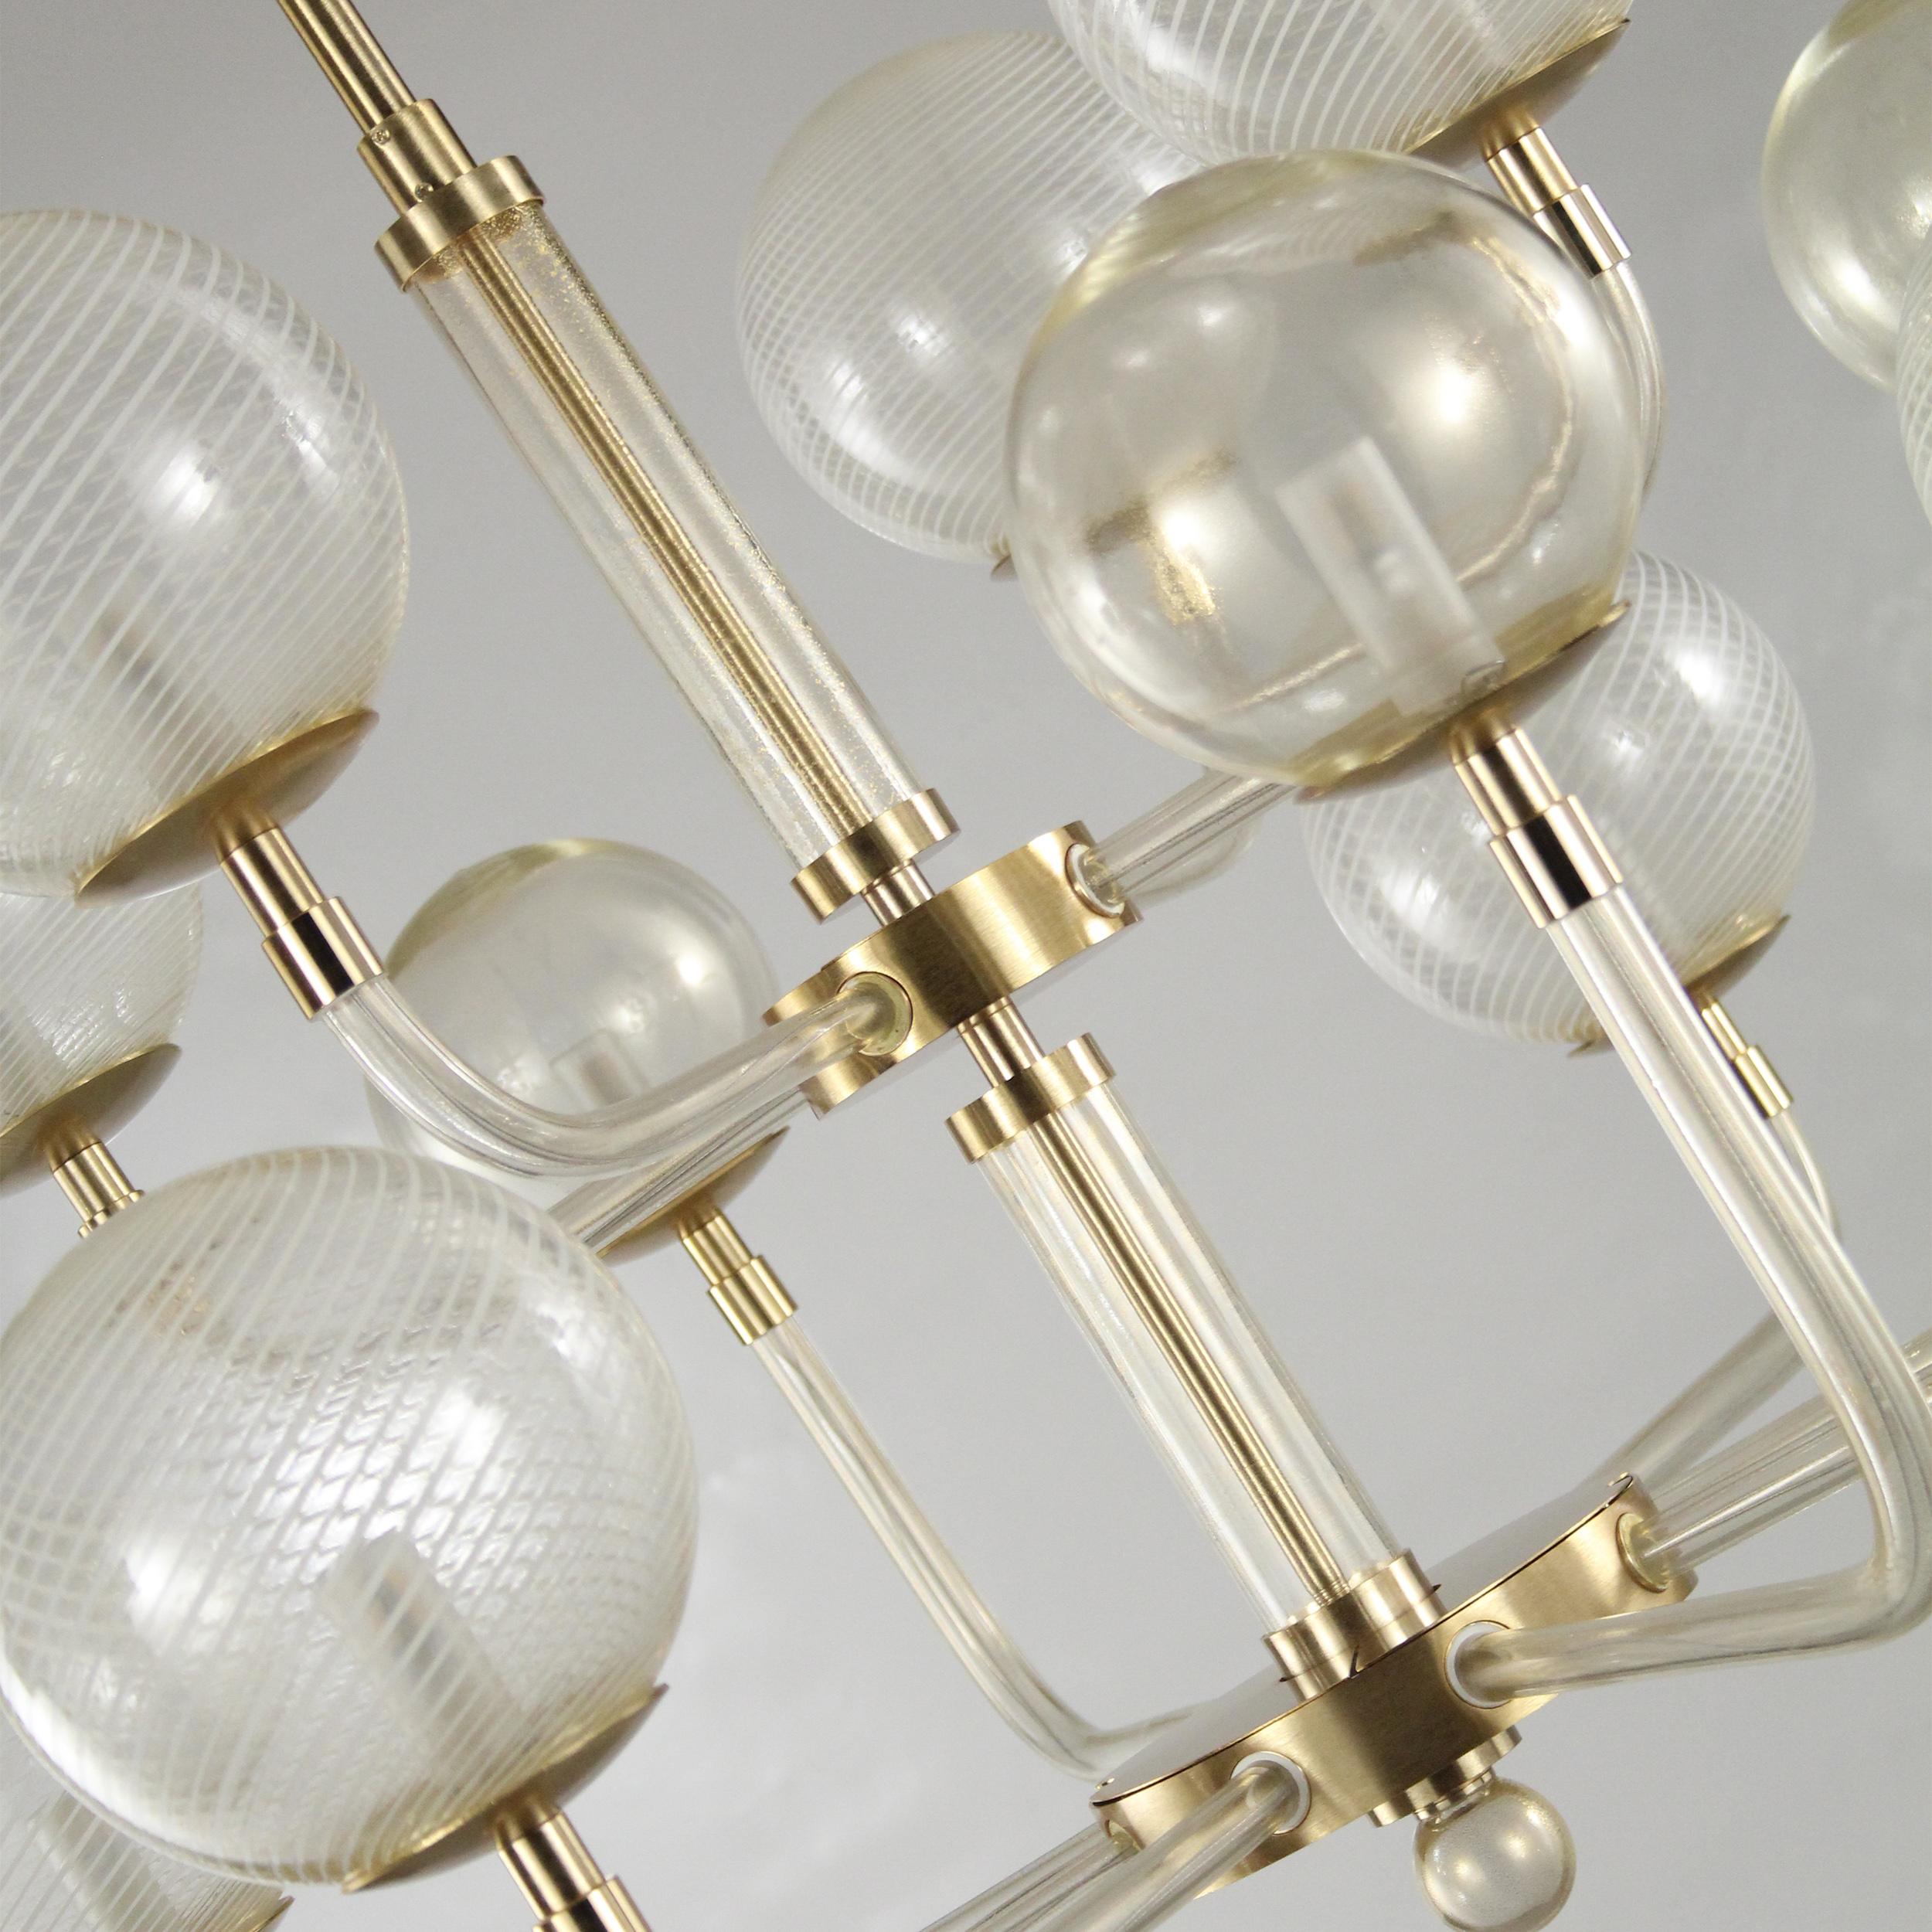 Chandelier 8+4 Lights, Spheres in Gold Leaf-White Filigree B&L by Multiforme In New Condition For Sale In Trebaseleghe, IT